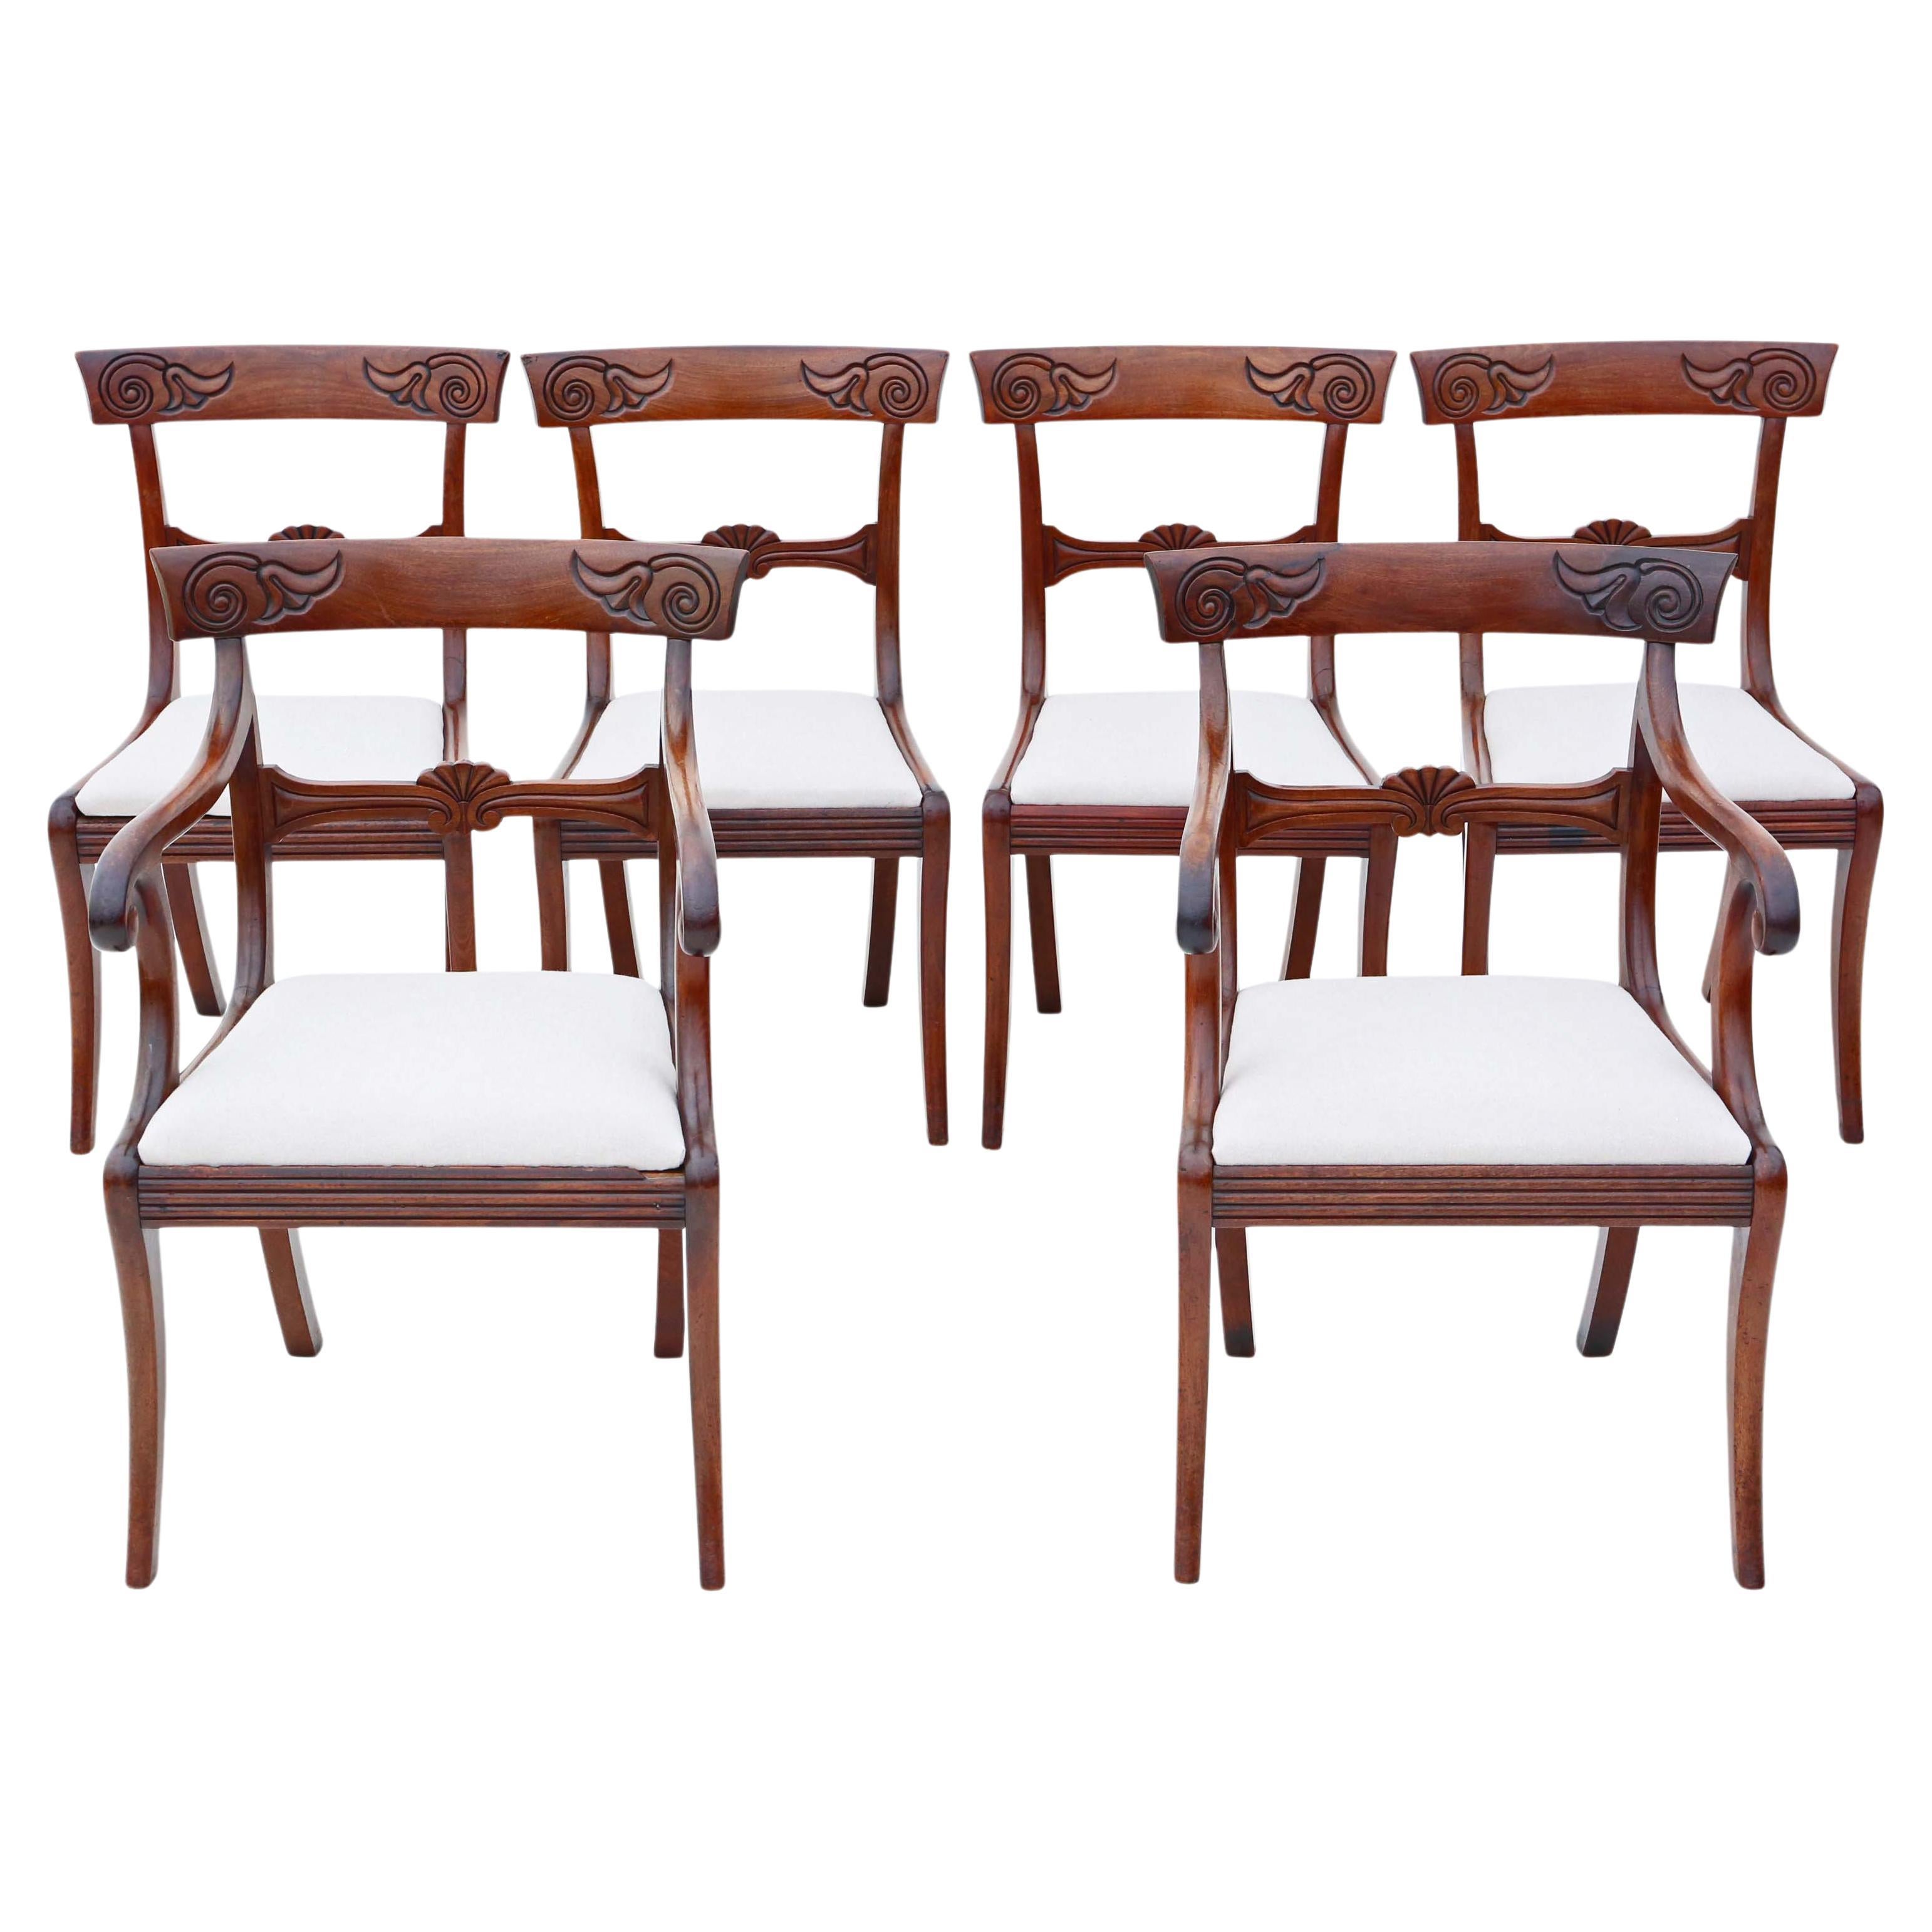 Regency Cuban Mahogany Dining Chairs: Set of 6 (4+2), Antique Quality, C1825